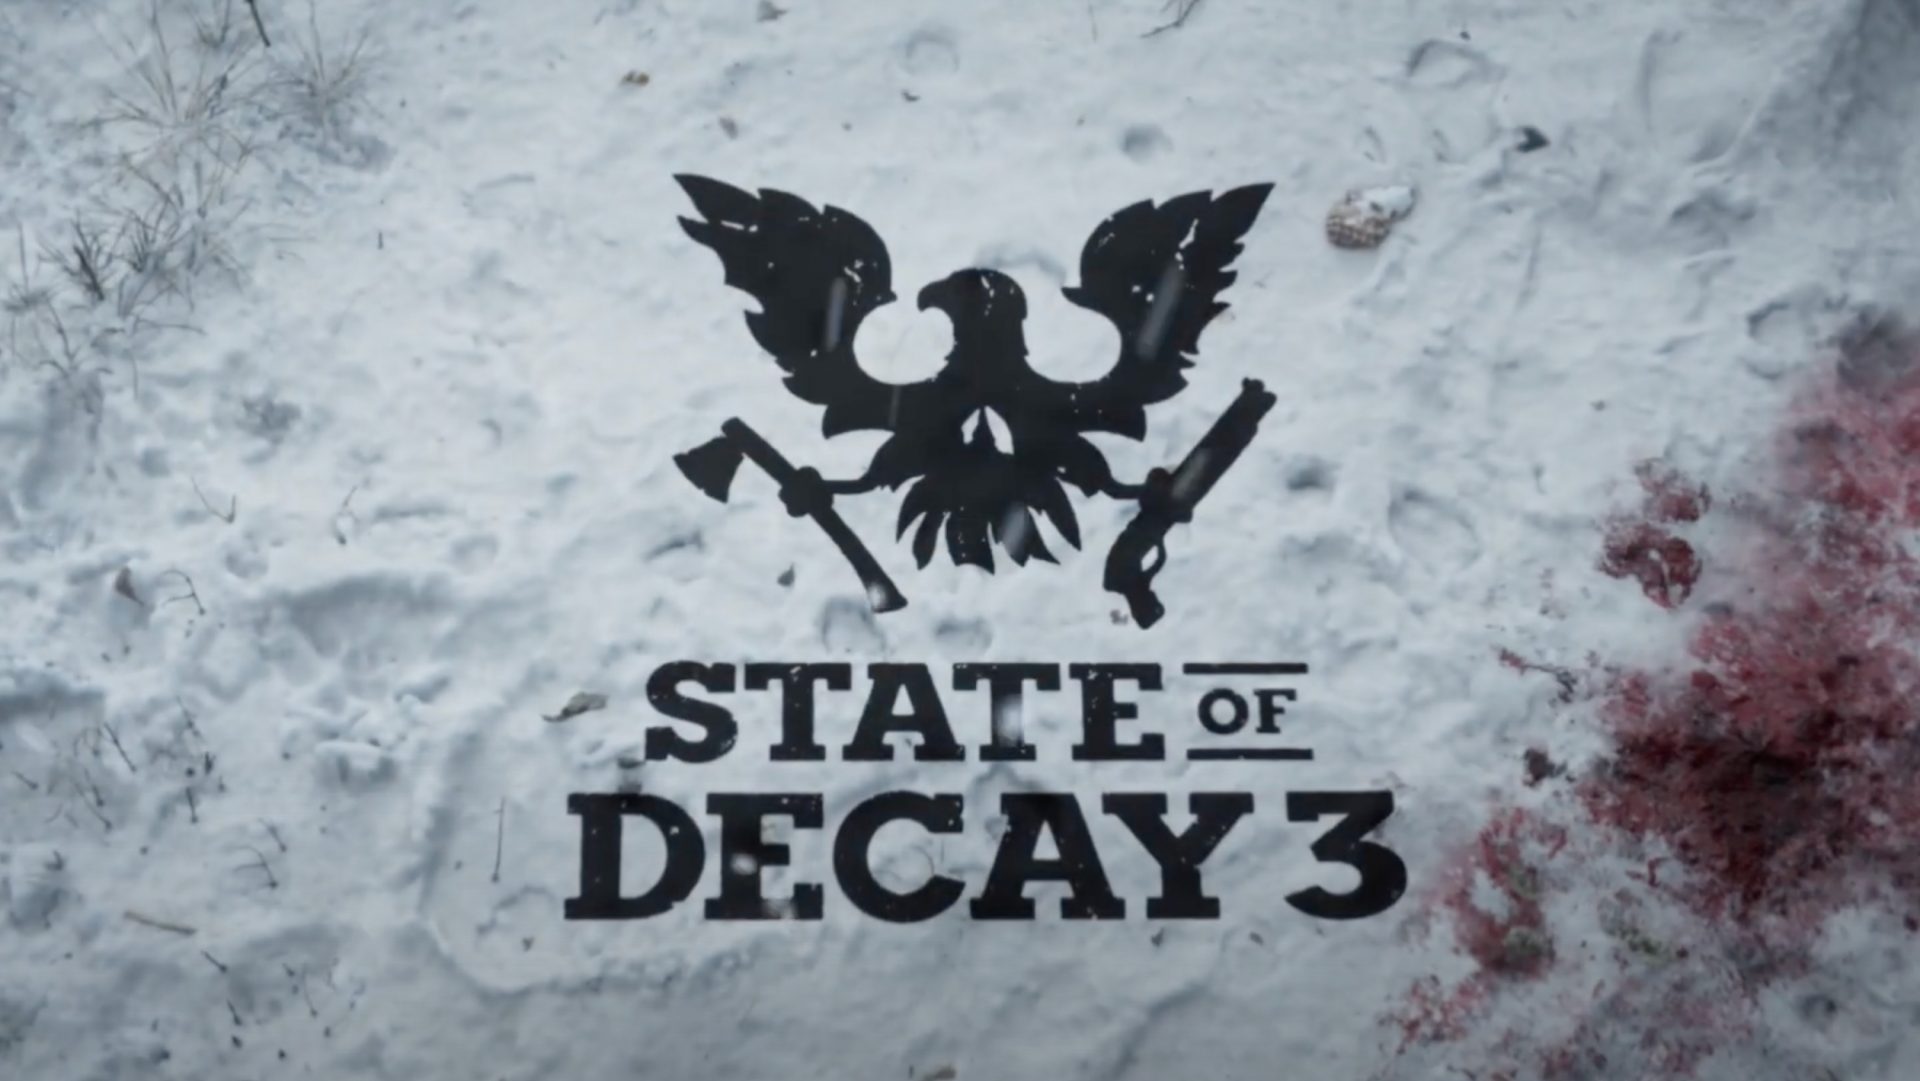 State of Decay 3 developed on Unreal Engine 5 with help of some mates at  The Coalition